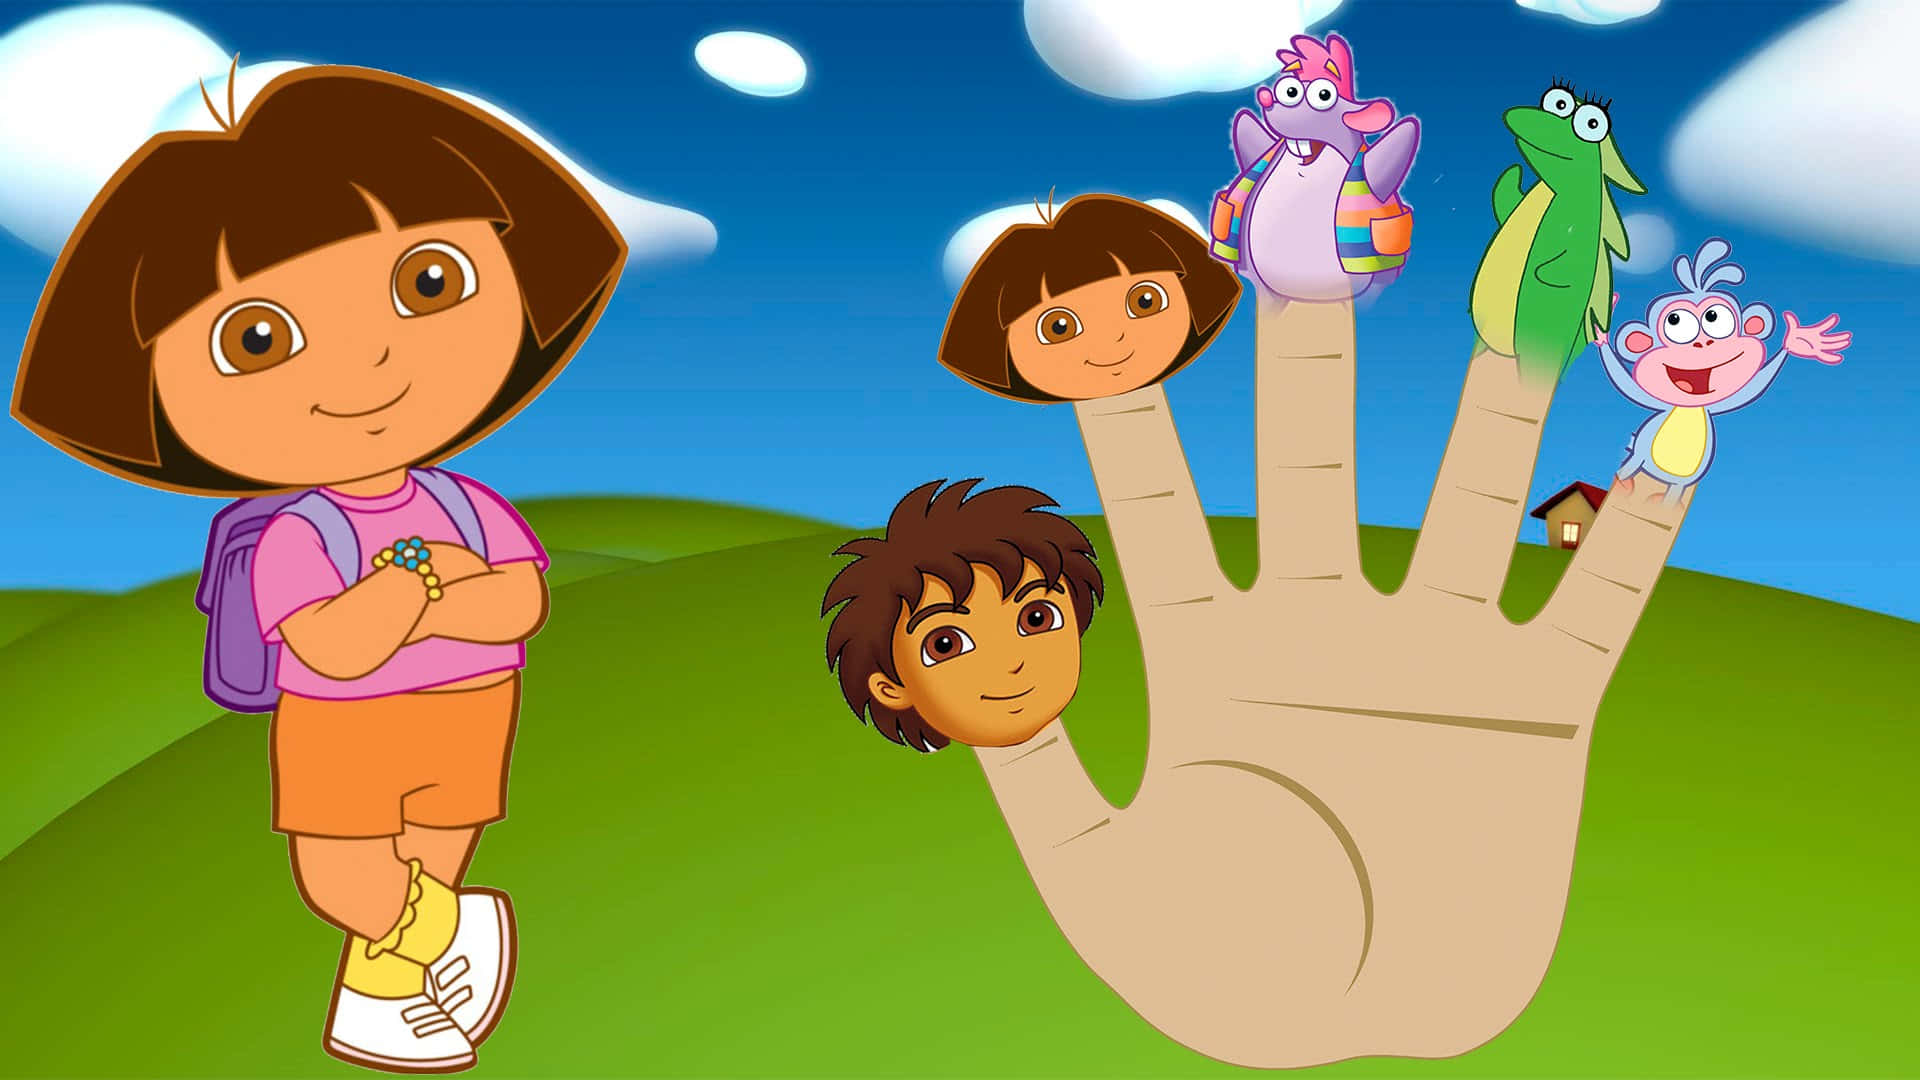 Dora The Explorer knows how to have a good time! Wallpaper